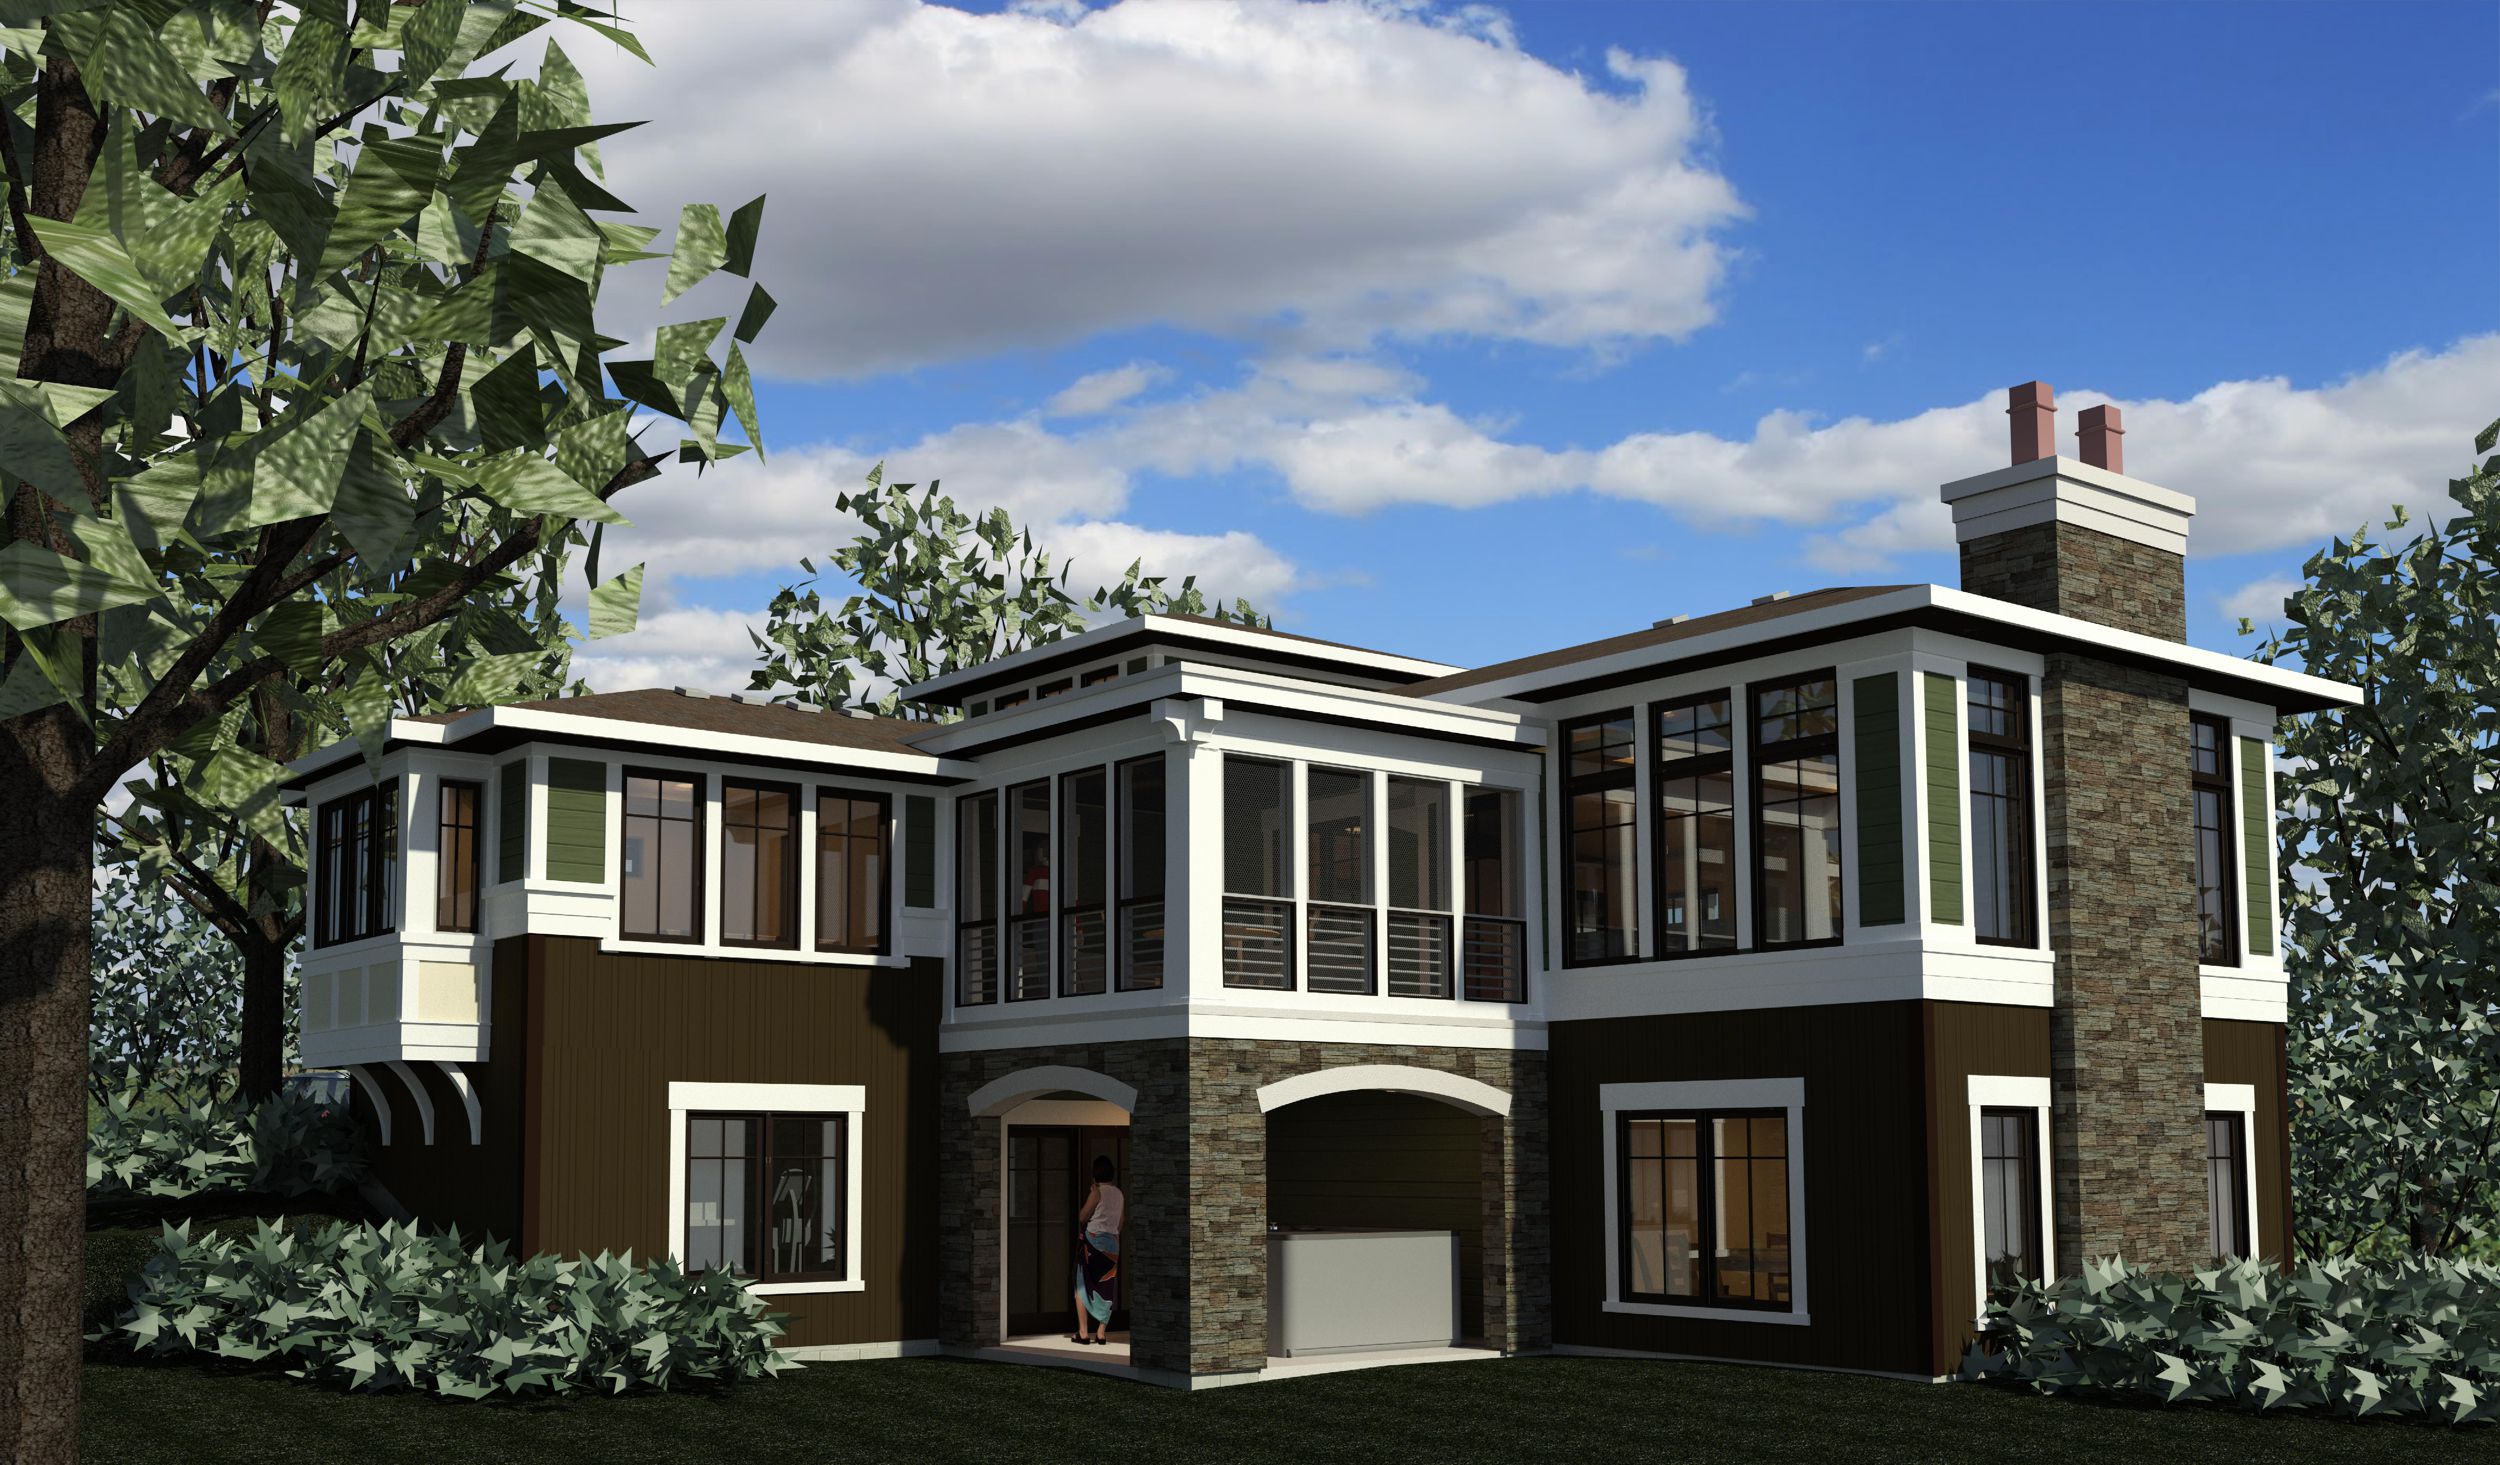 Color computer rendering of rear side of home with screen porch